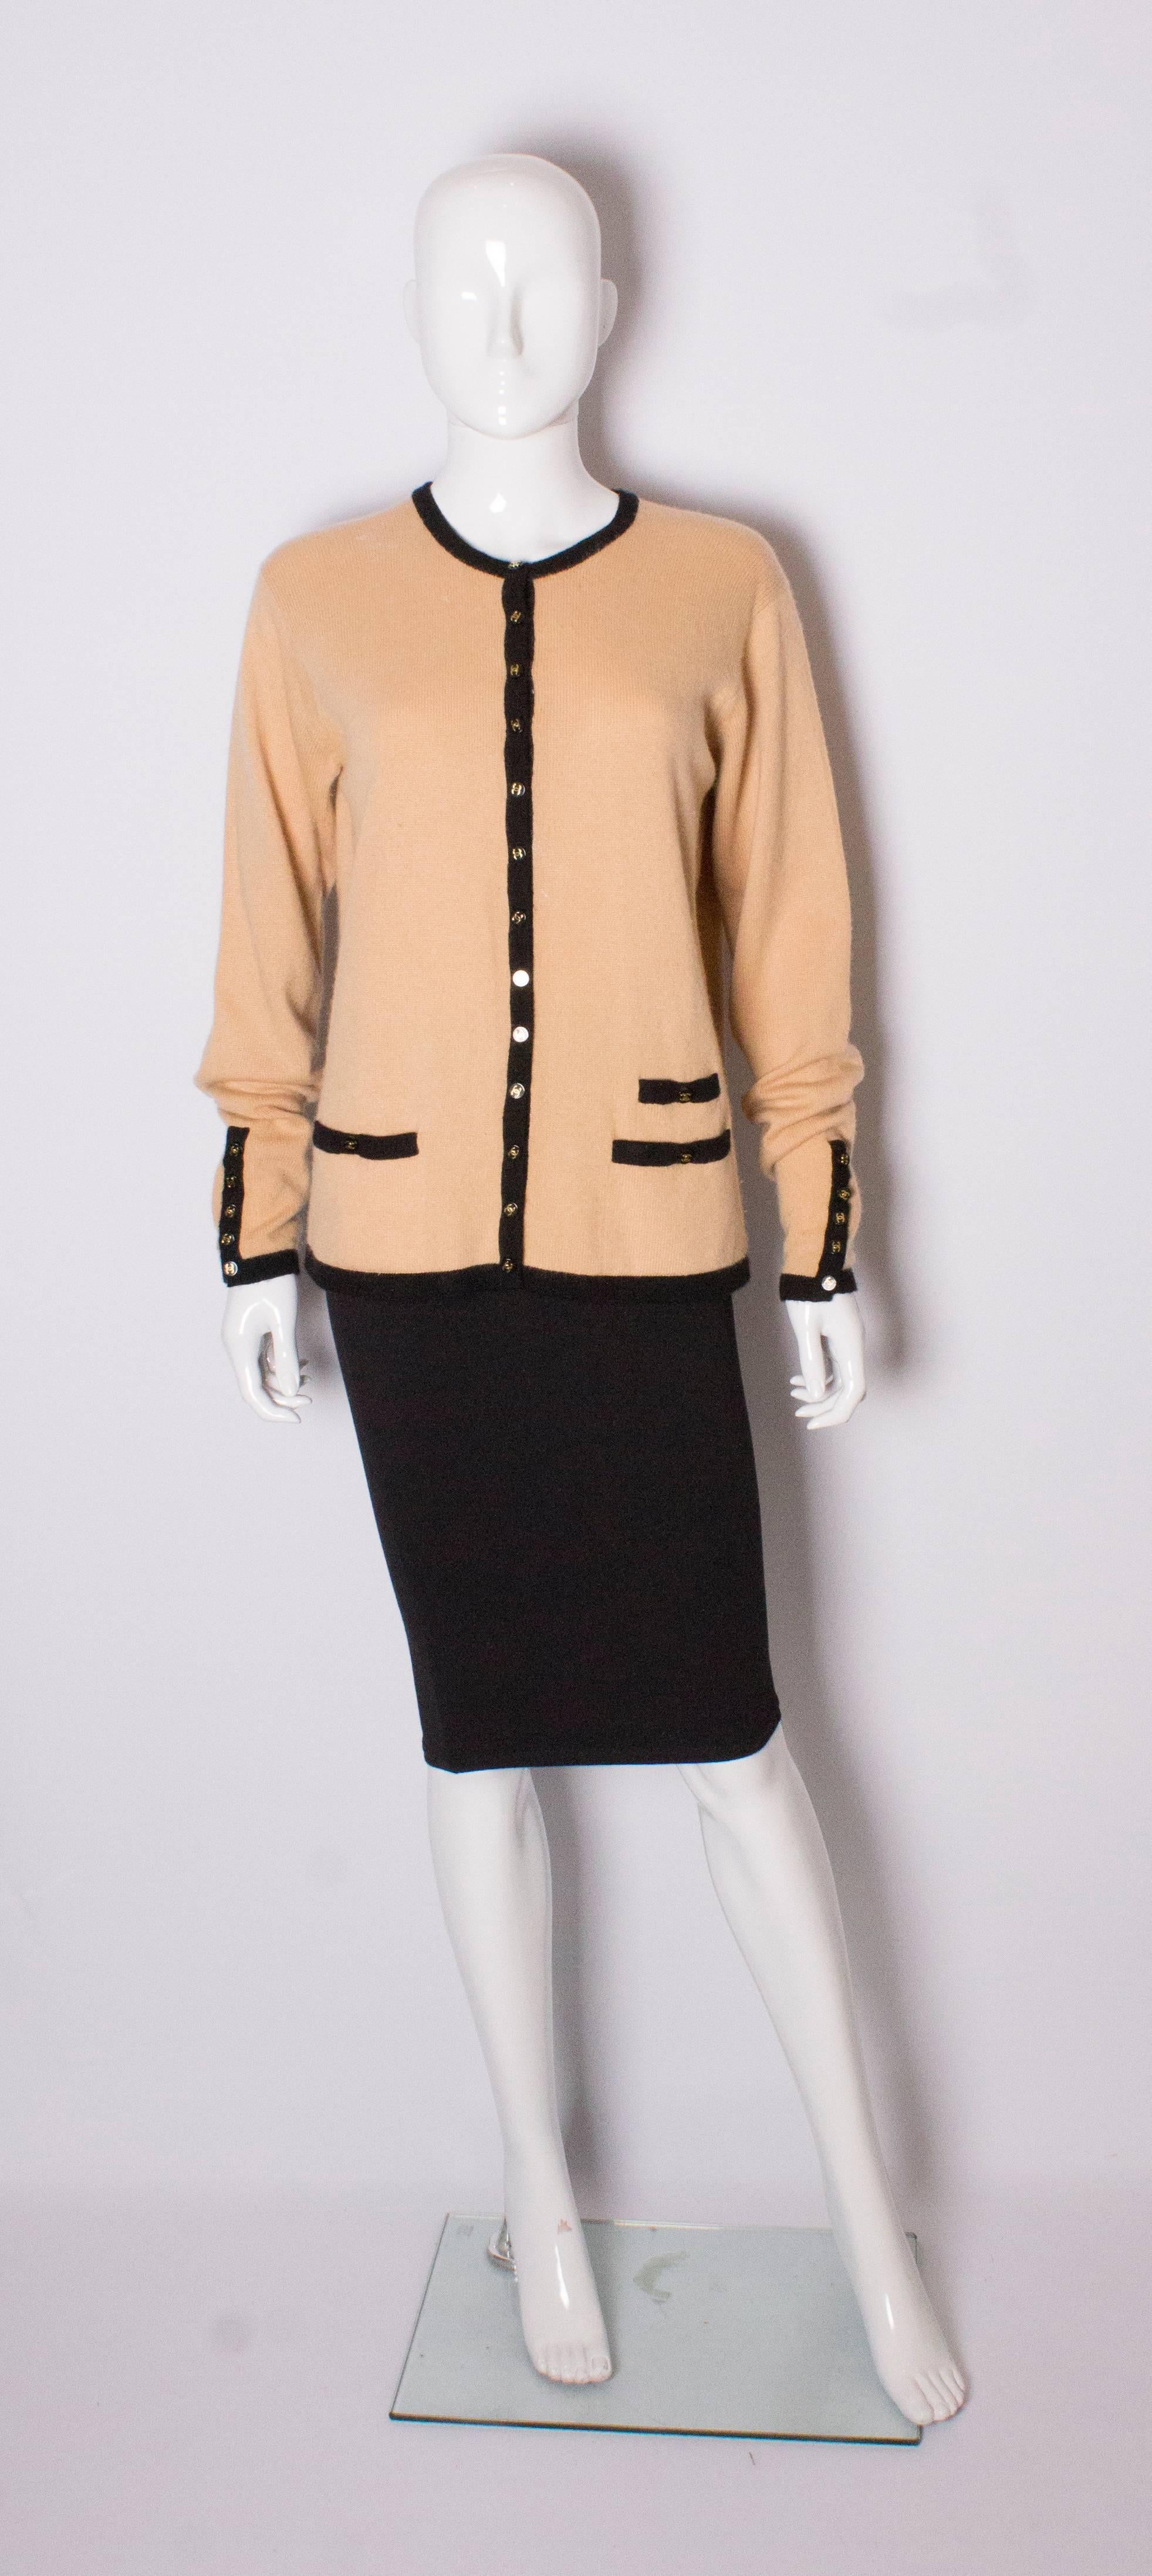 Chic cashmere cardigan by Chanel. The cardigan is a caramel colour with black trim around the neck, hem and cuffs. It as all the original black Chanel buttons.